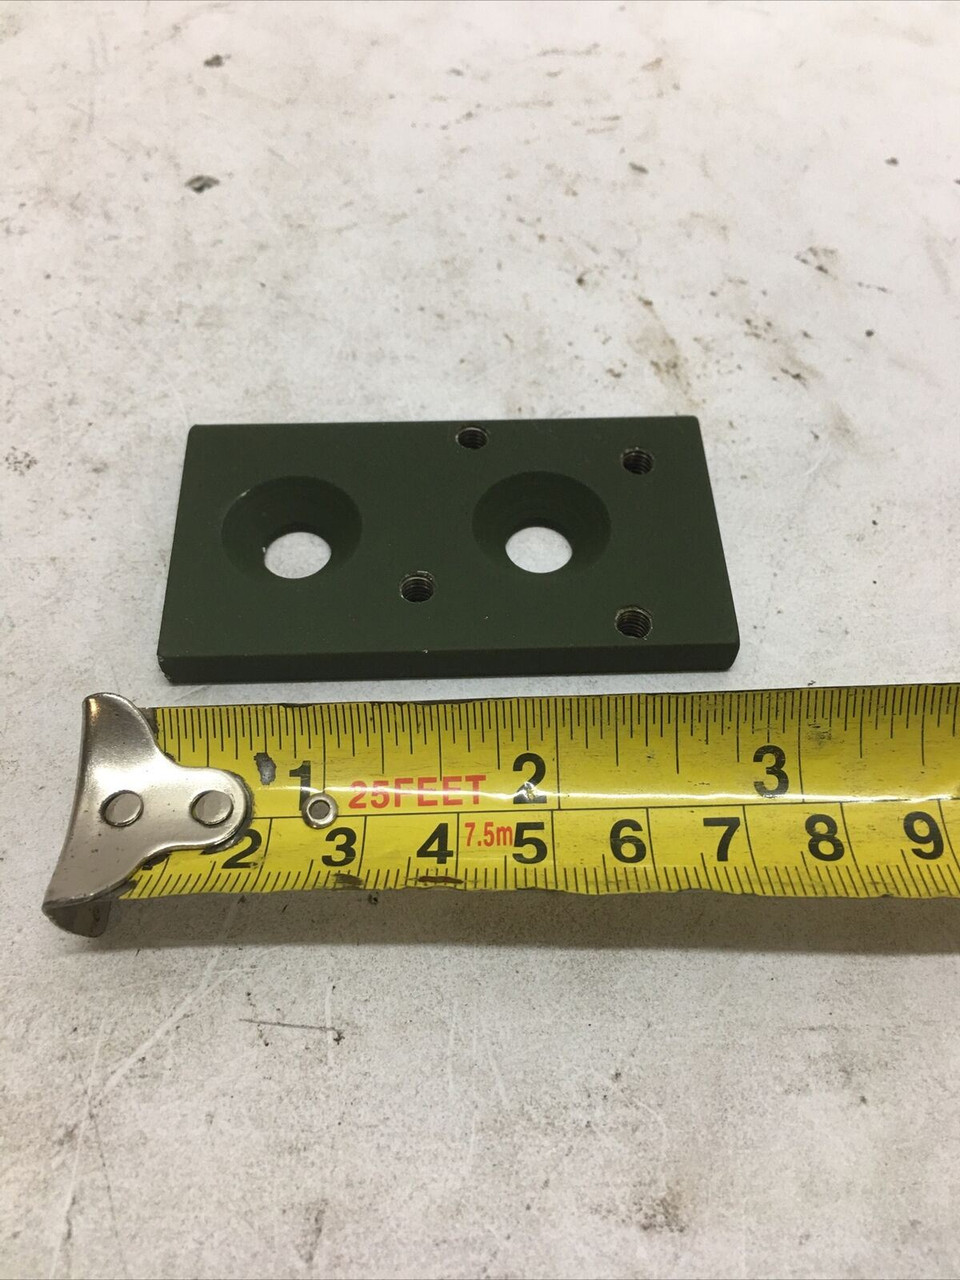 Pry Bar Keeper Mounting Plate AC86104-30 Armatec